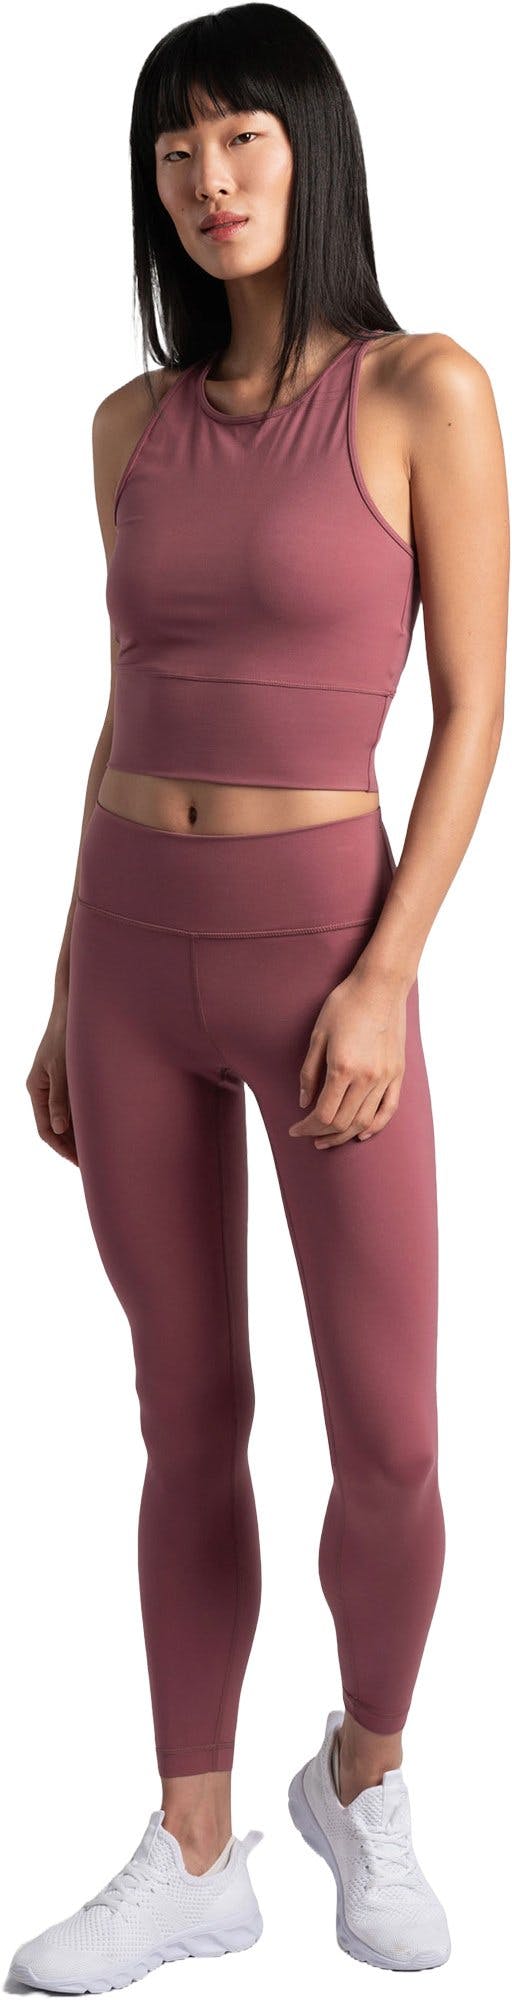 Product image for Comfort Stretch Ankle Leggings - Women's